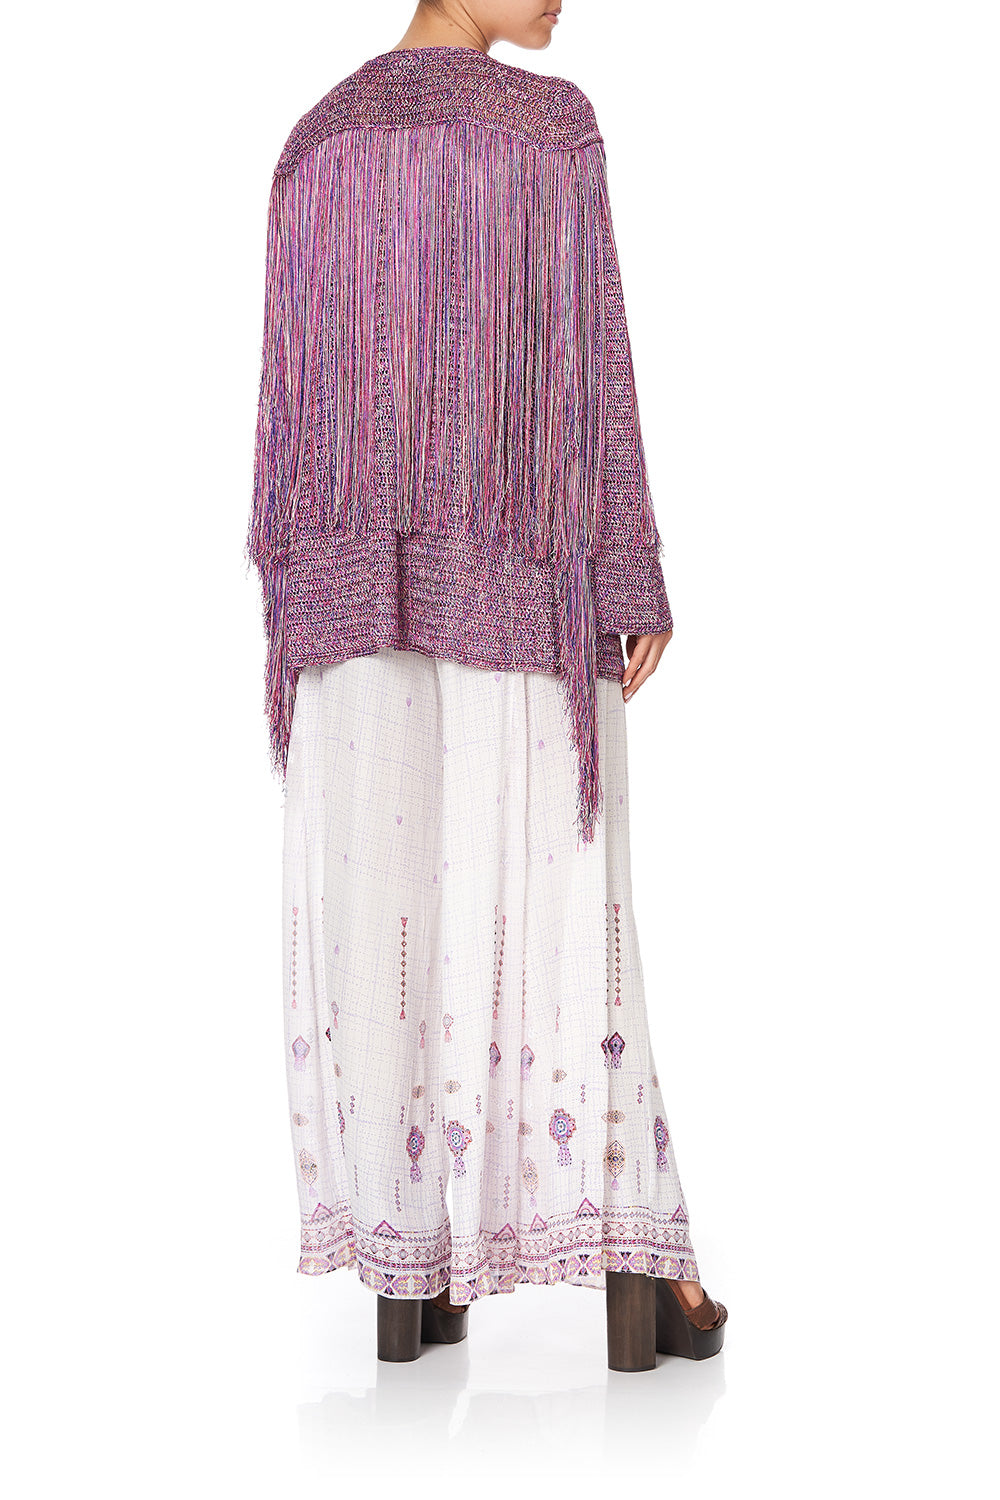 CROCHET LAYERING PIECE WITH LONG TASSELS TANAMI ROAD